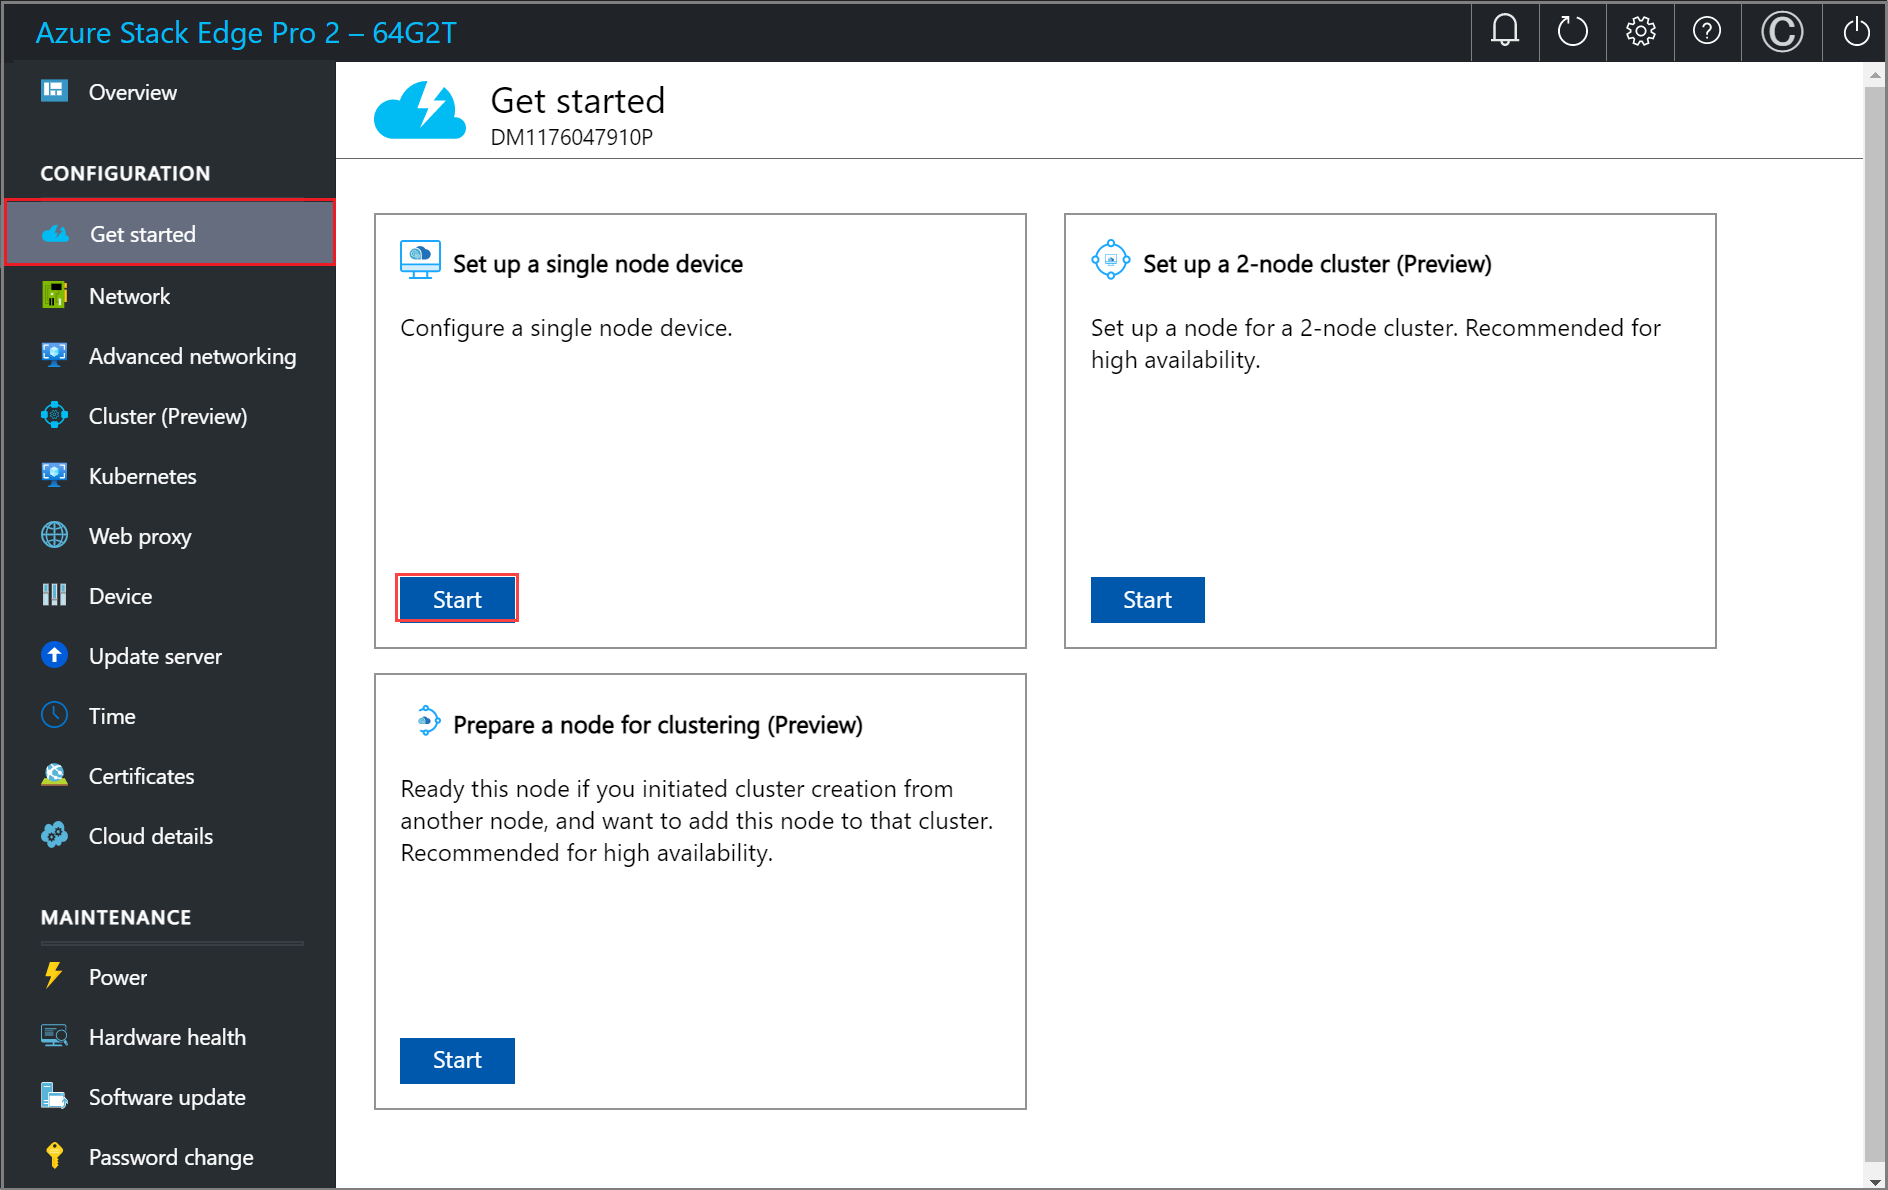 Screenshot of the Get started page in the local web UI of an Azure Stack Edge device. The Start button on the Set up a single node device tile is highlighted.